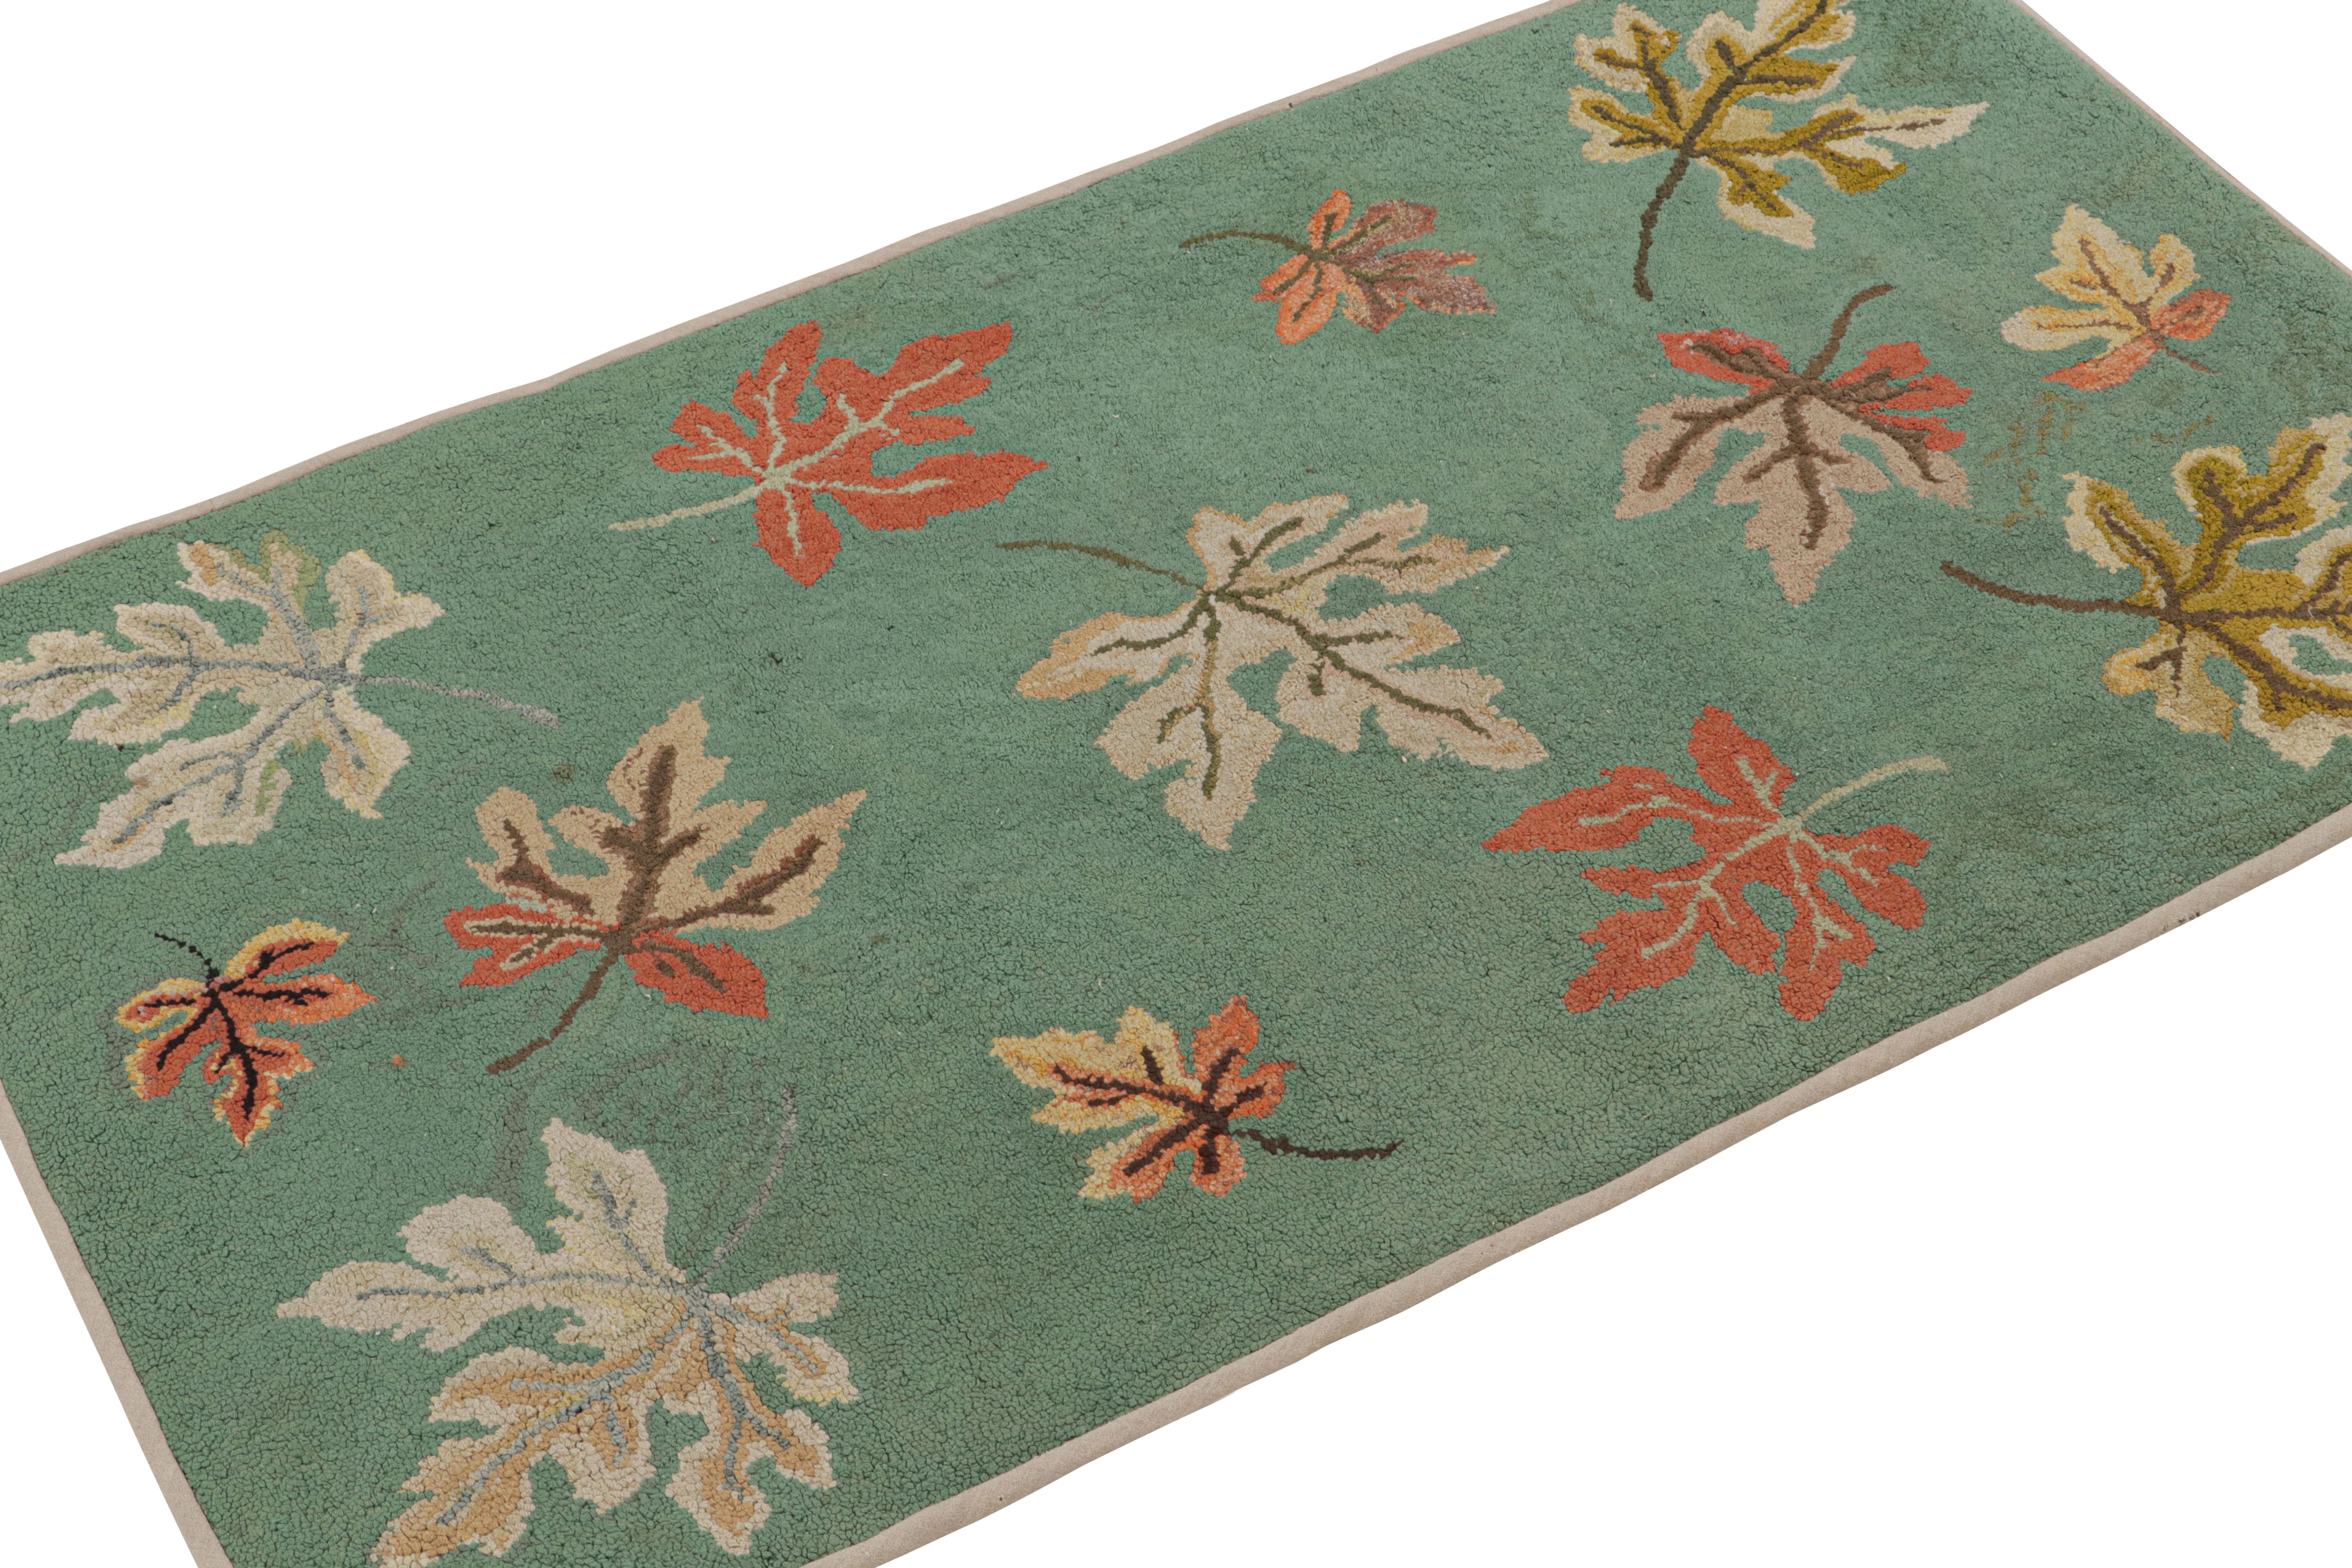 A rare 2x4 antique hooked rug of United States provenance, handmade in wool and fabric circa 1920-1930, featuring floral patterns depicting fallen leaves. 

On the Design: 

Keen eyes will note beige-brown, red and gold in the leaf patterns over the